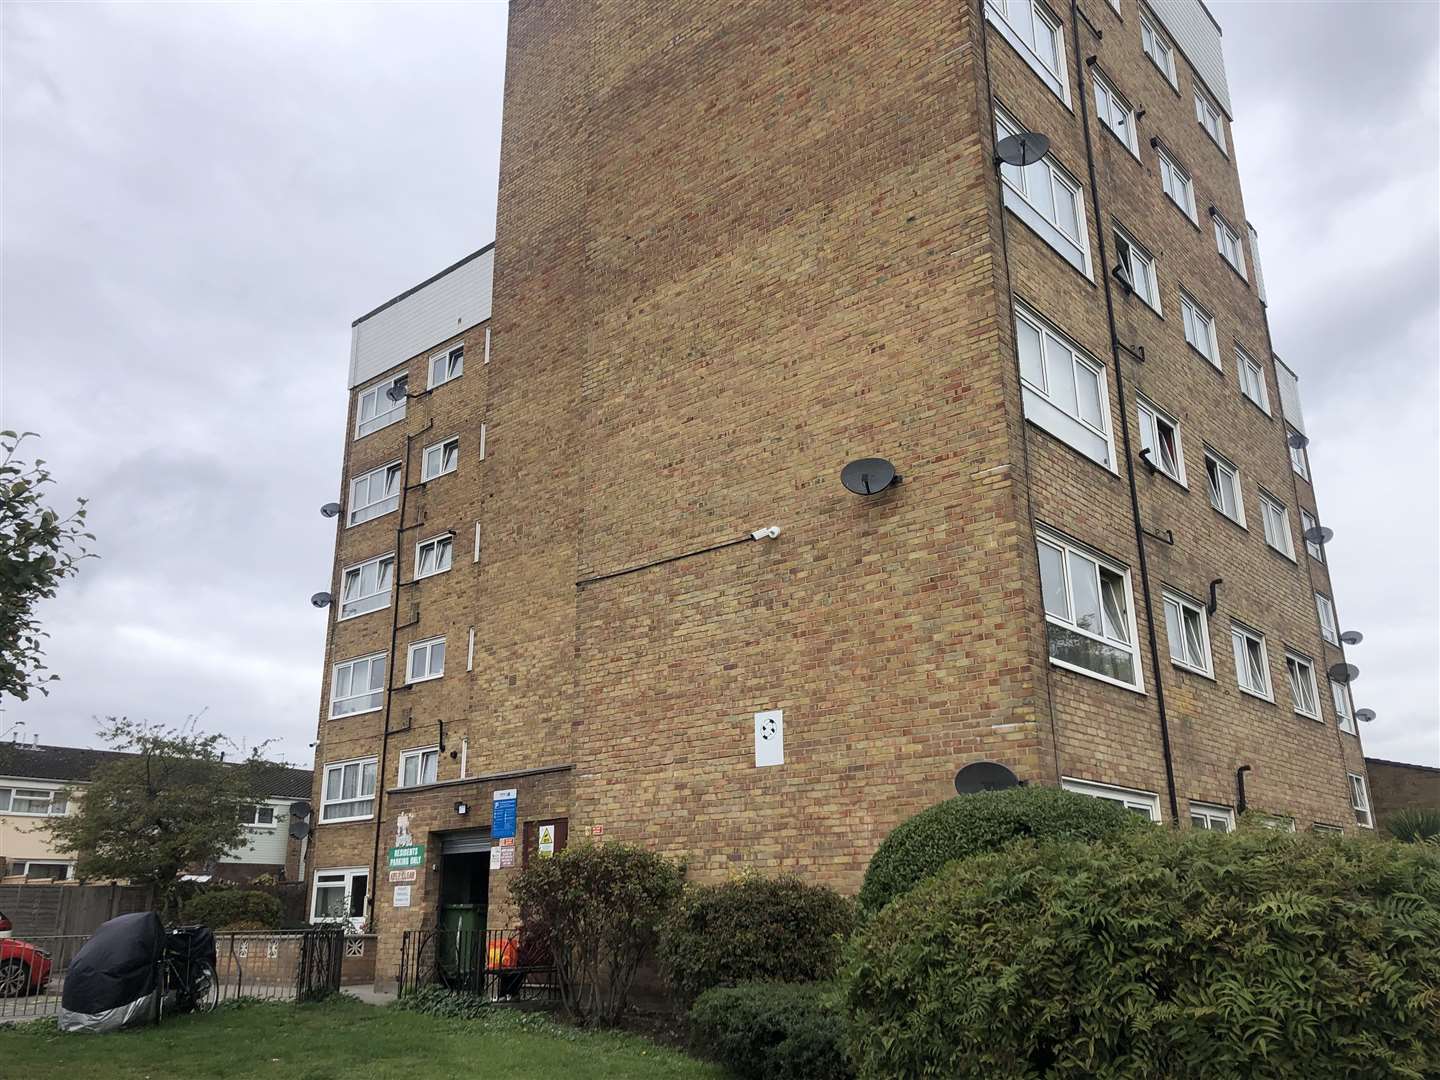 The block of flats is run by CDS Co-Operatives